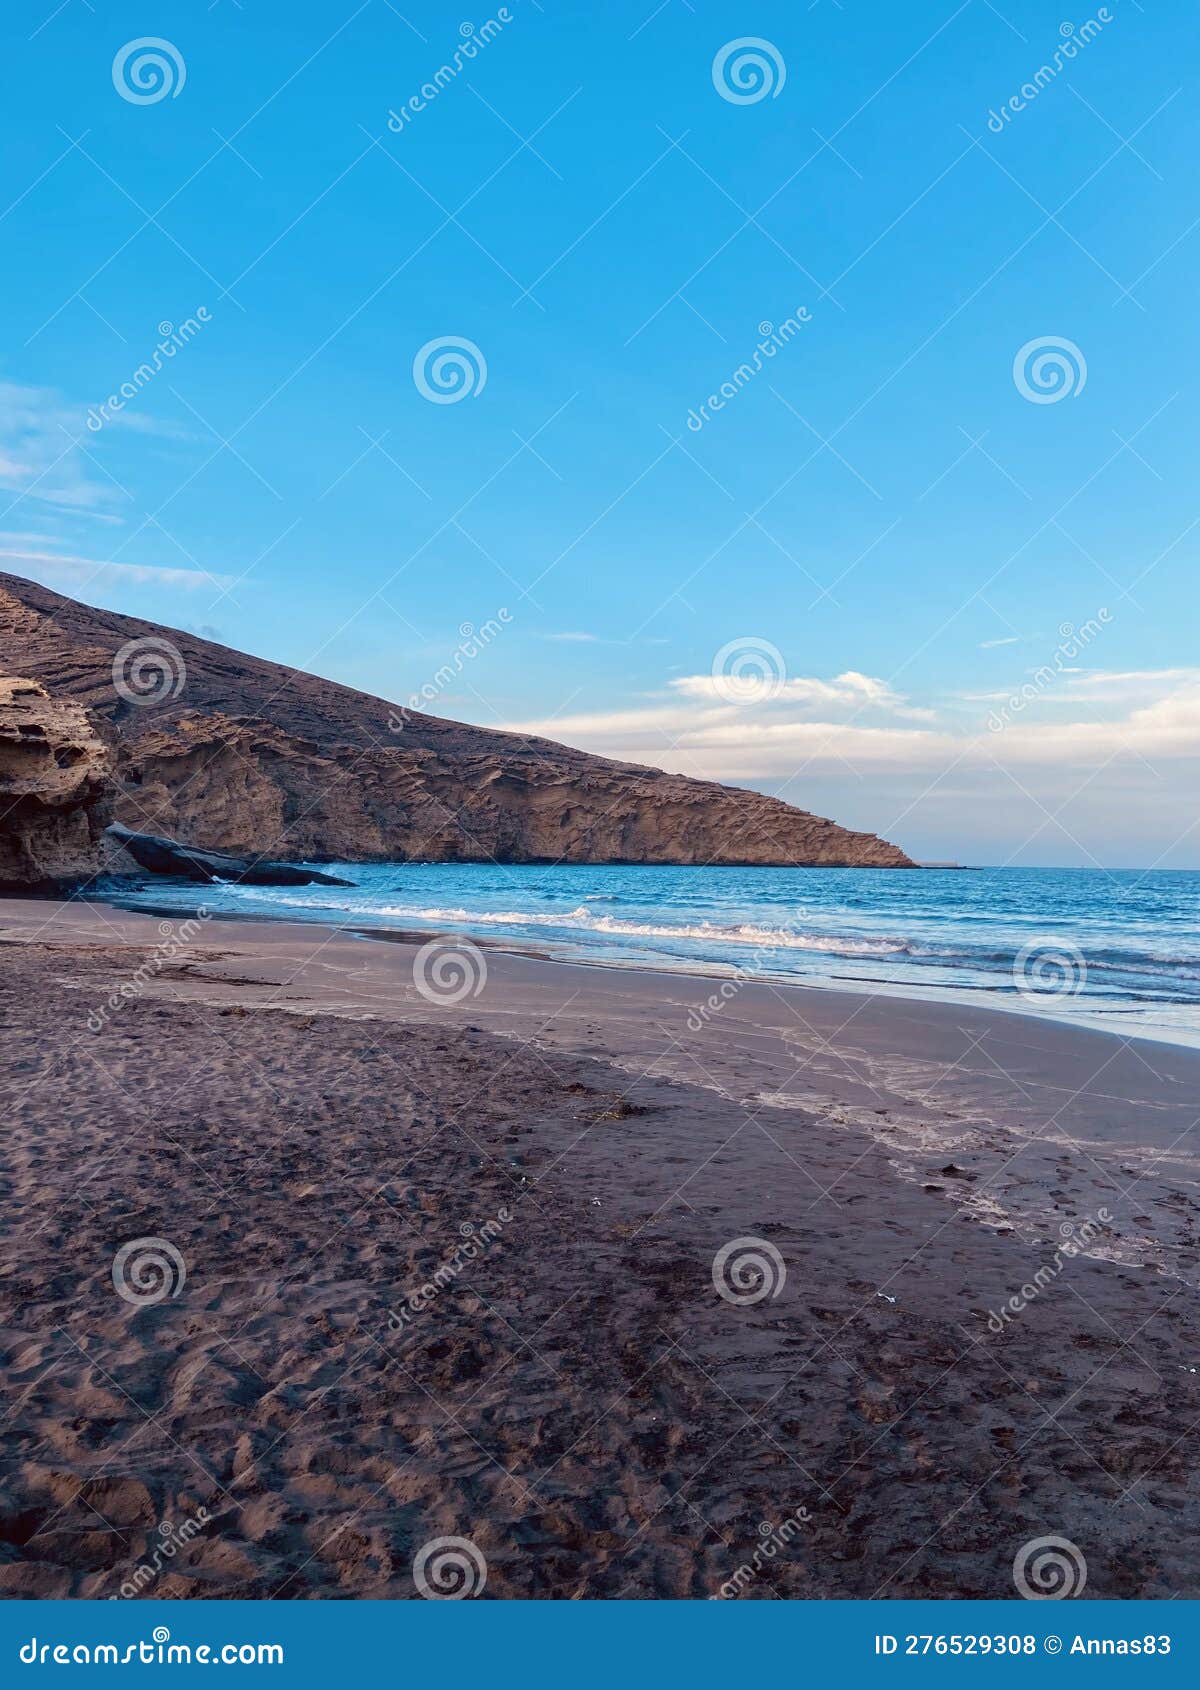 montaÃ±a pelada beach in the evening without people, blue ocean and volcanic mountain, peaceful moment